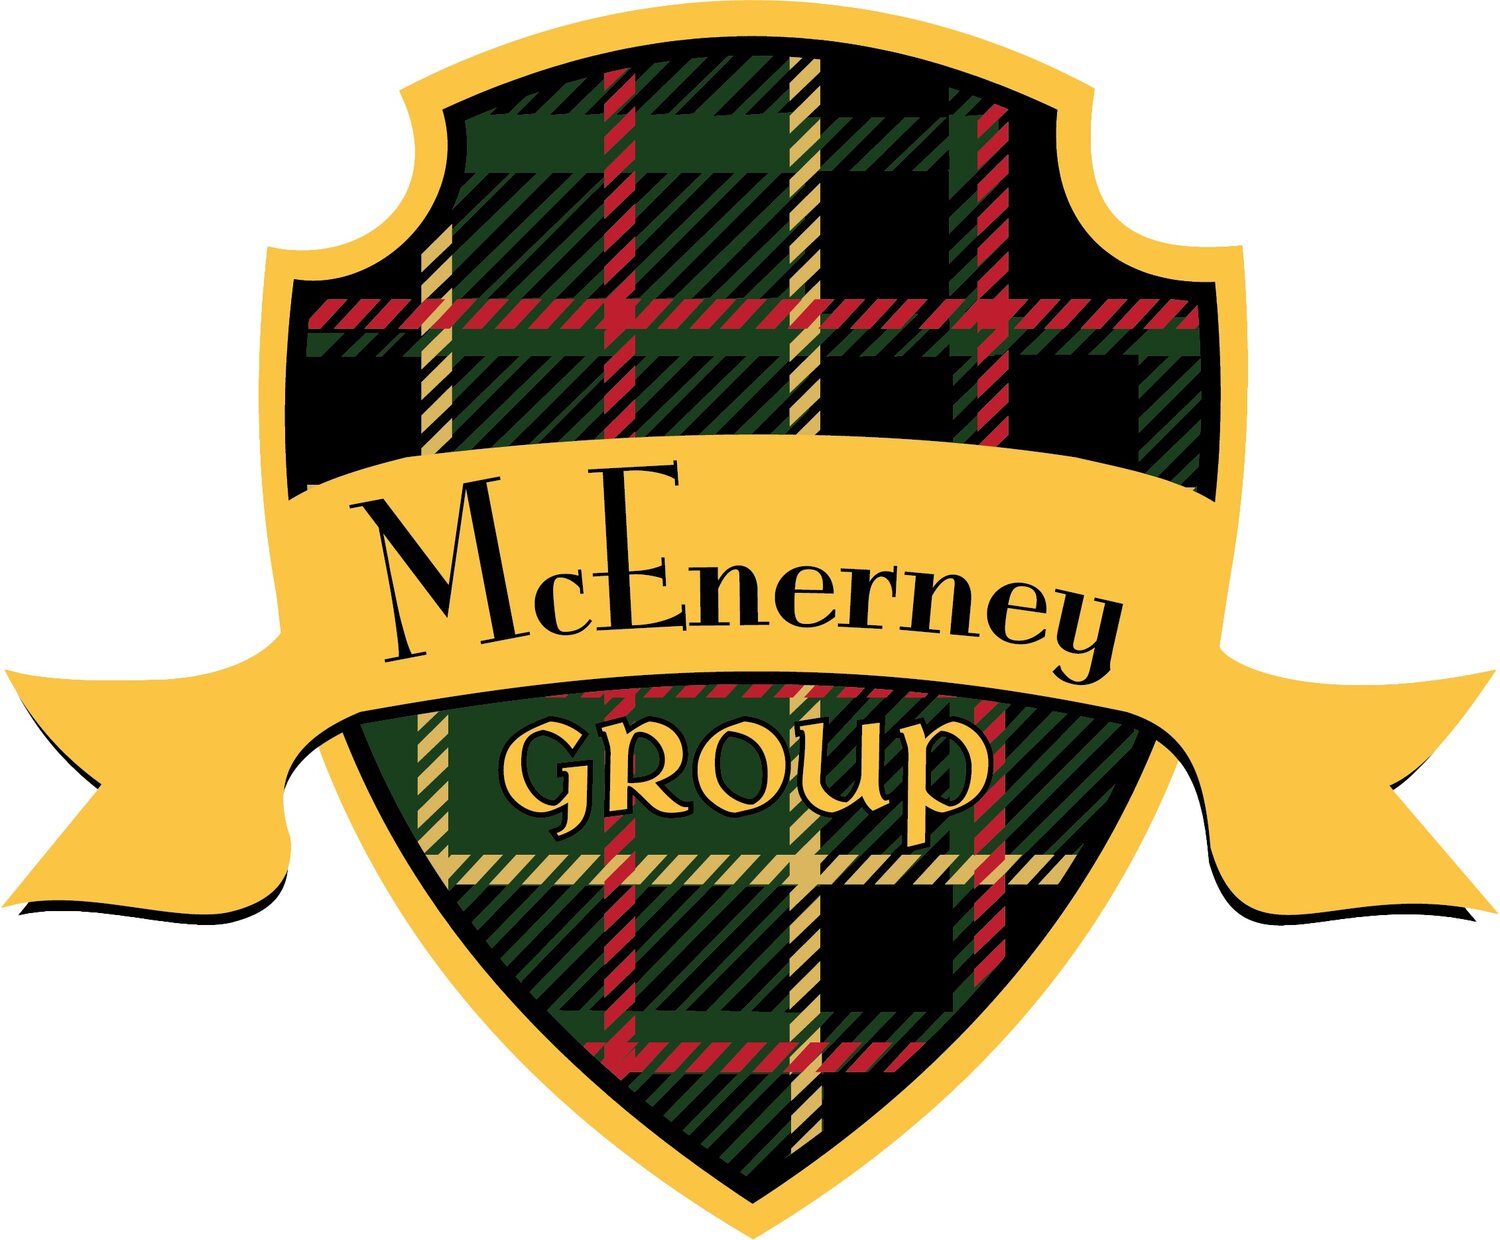 The McEnerney Group